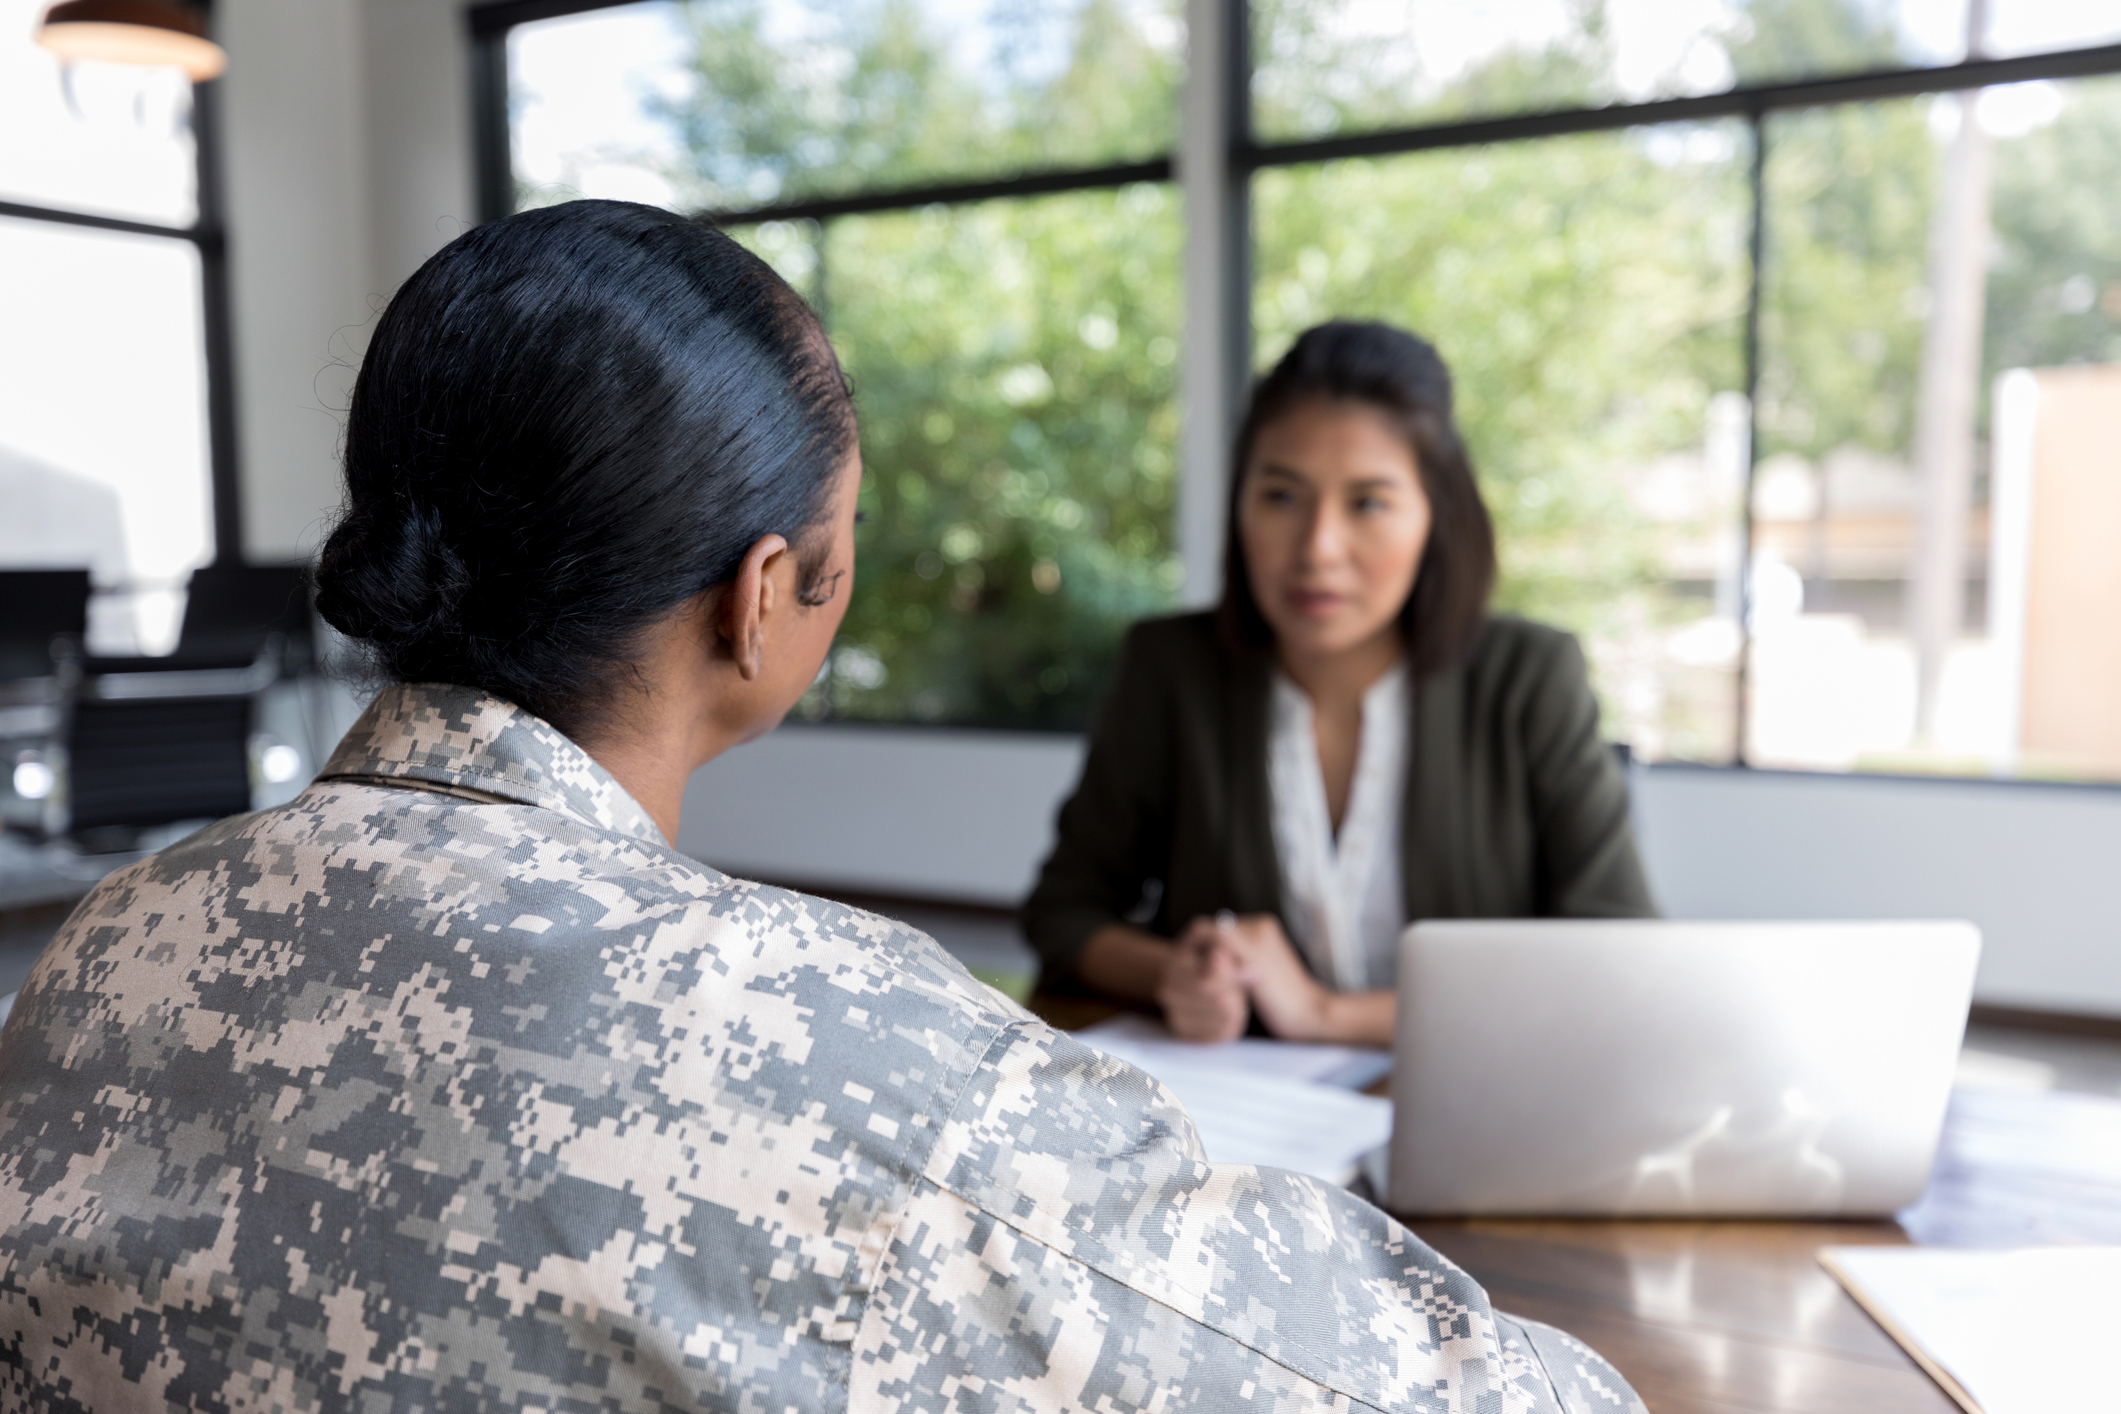 Mid adult military veteran talks with a therapist. The therapist is blurred in the background.